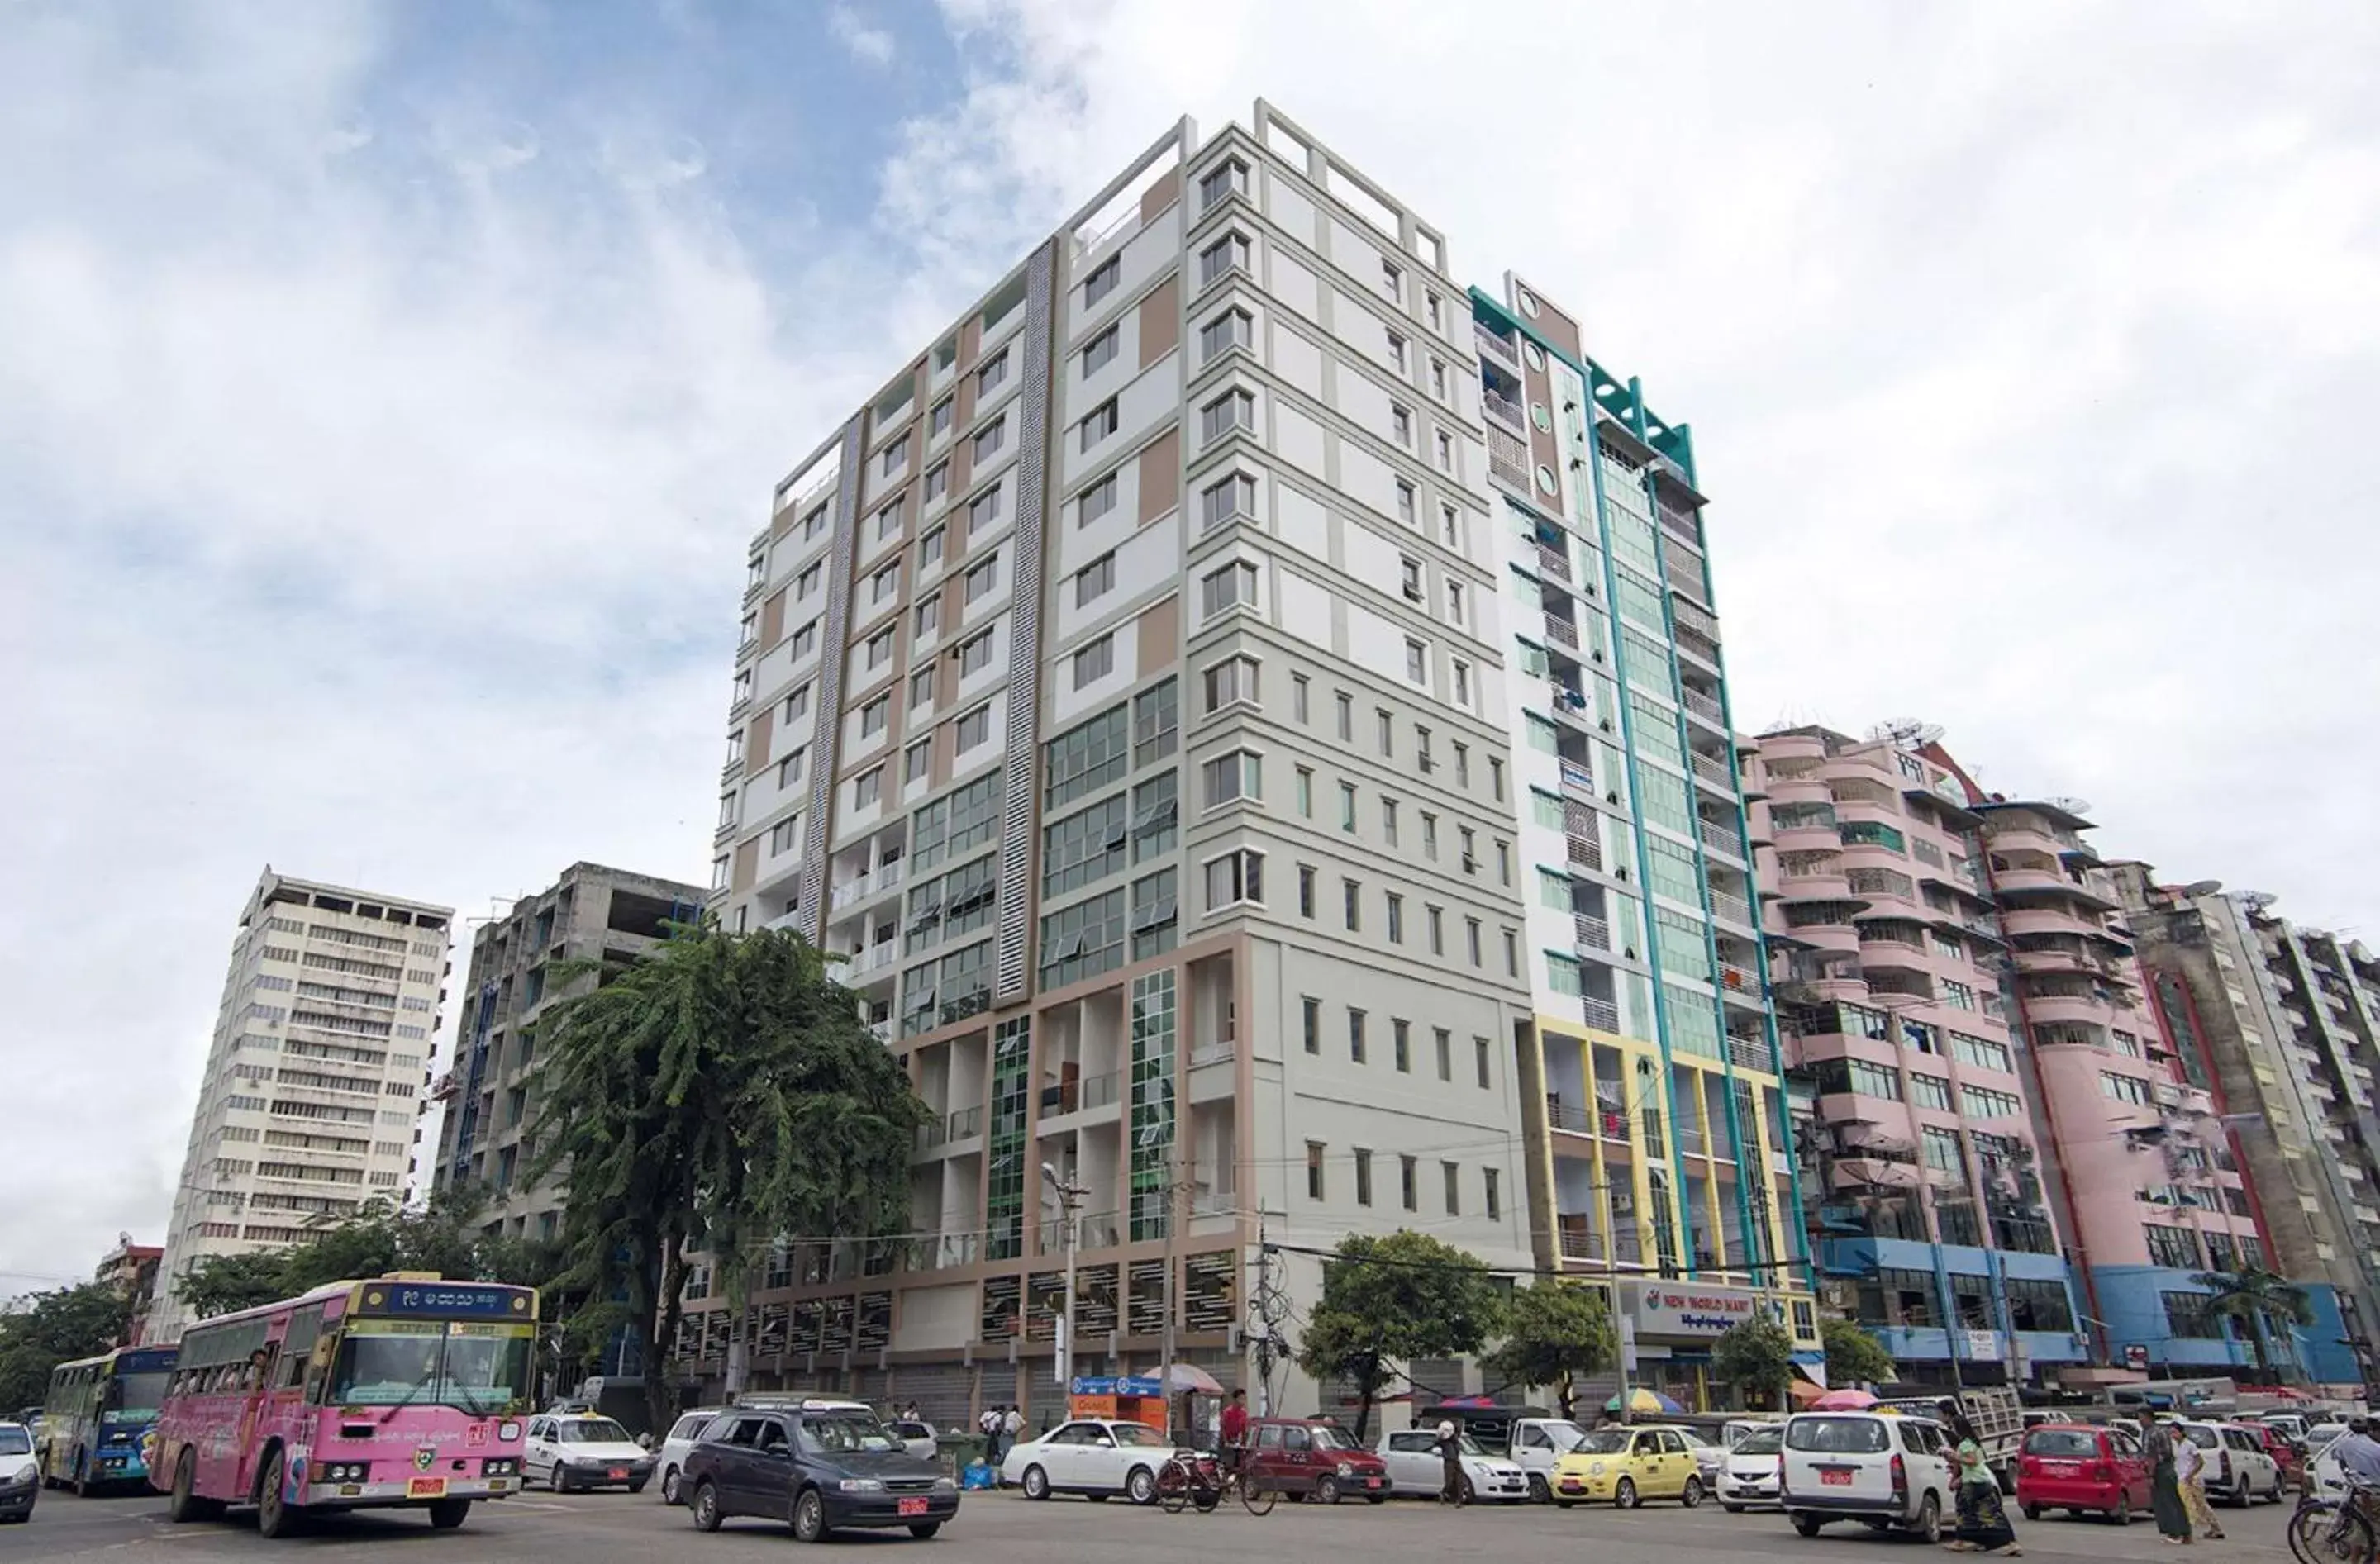 Property Building in Best Western Chinatown Hotel